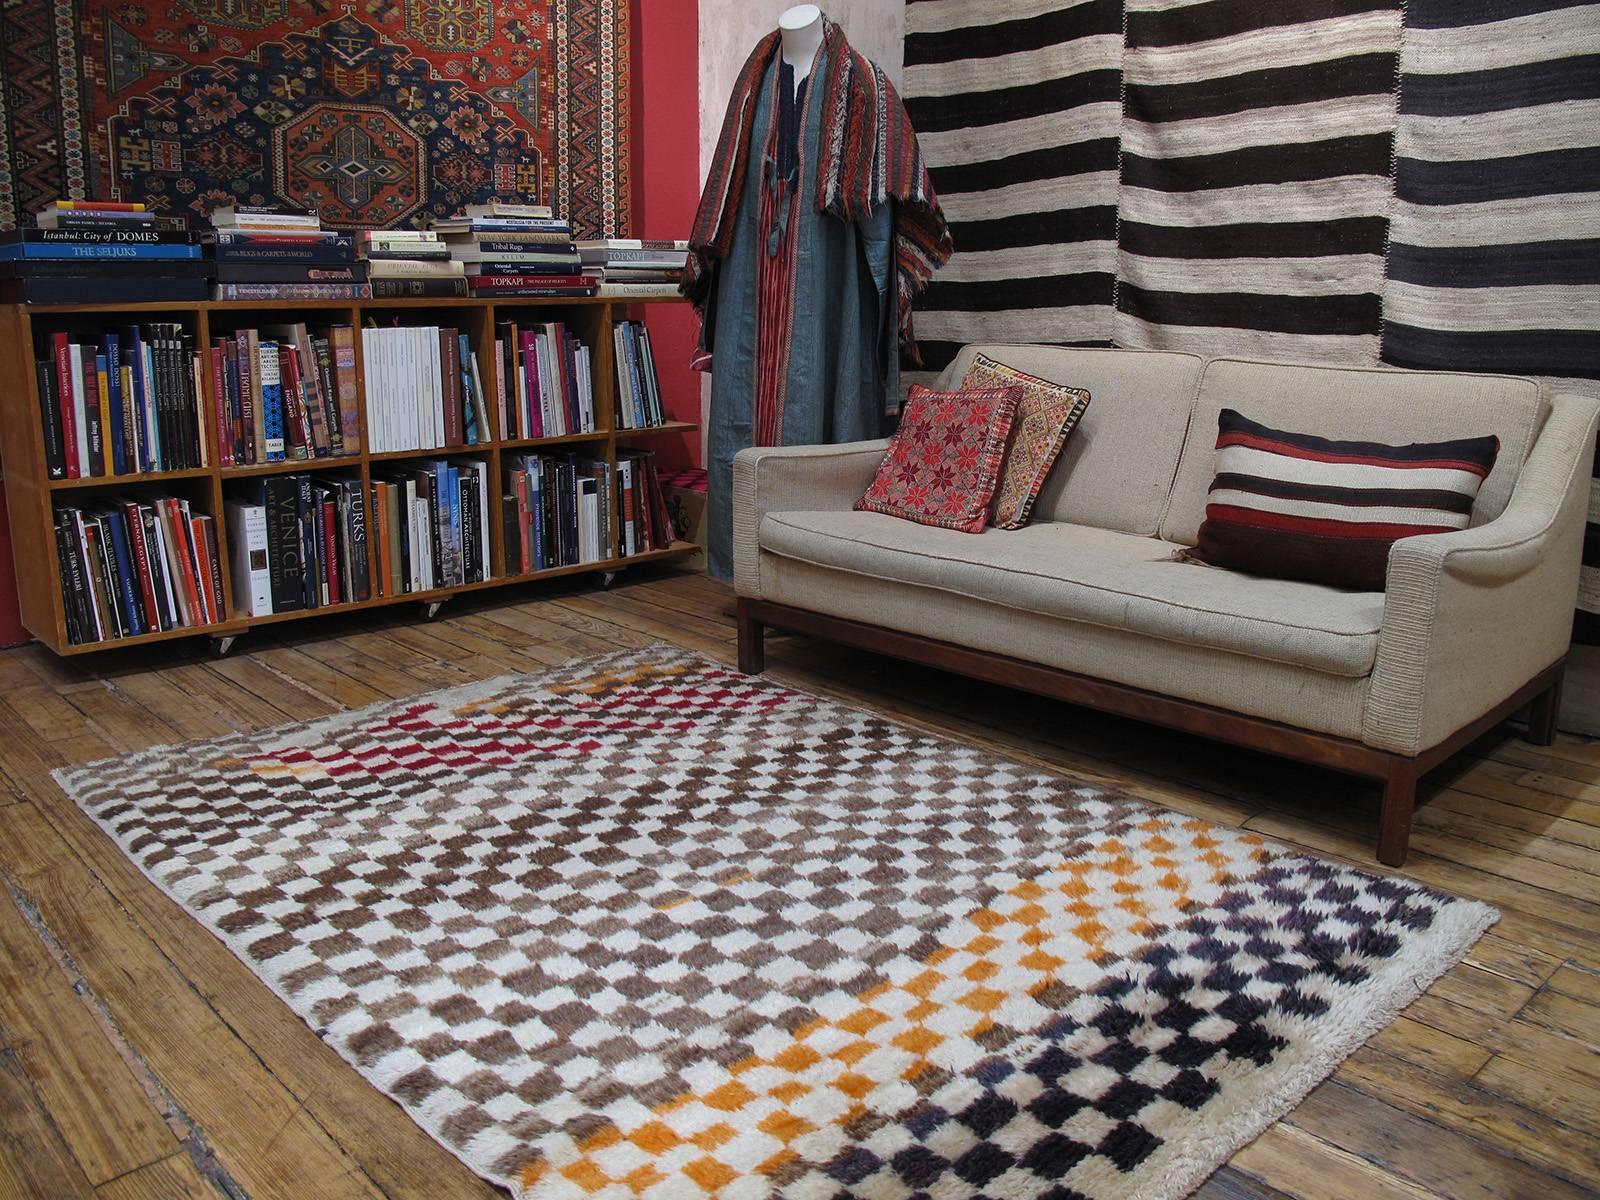 A very high quality example of the thick fleece-like rugs known as 